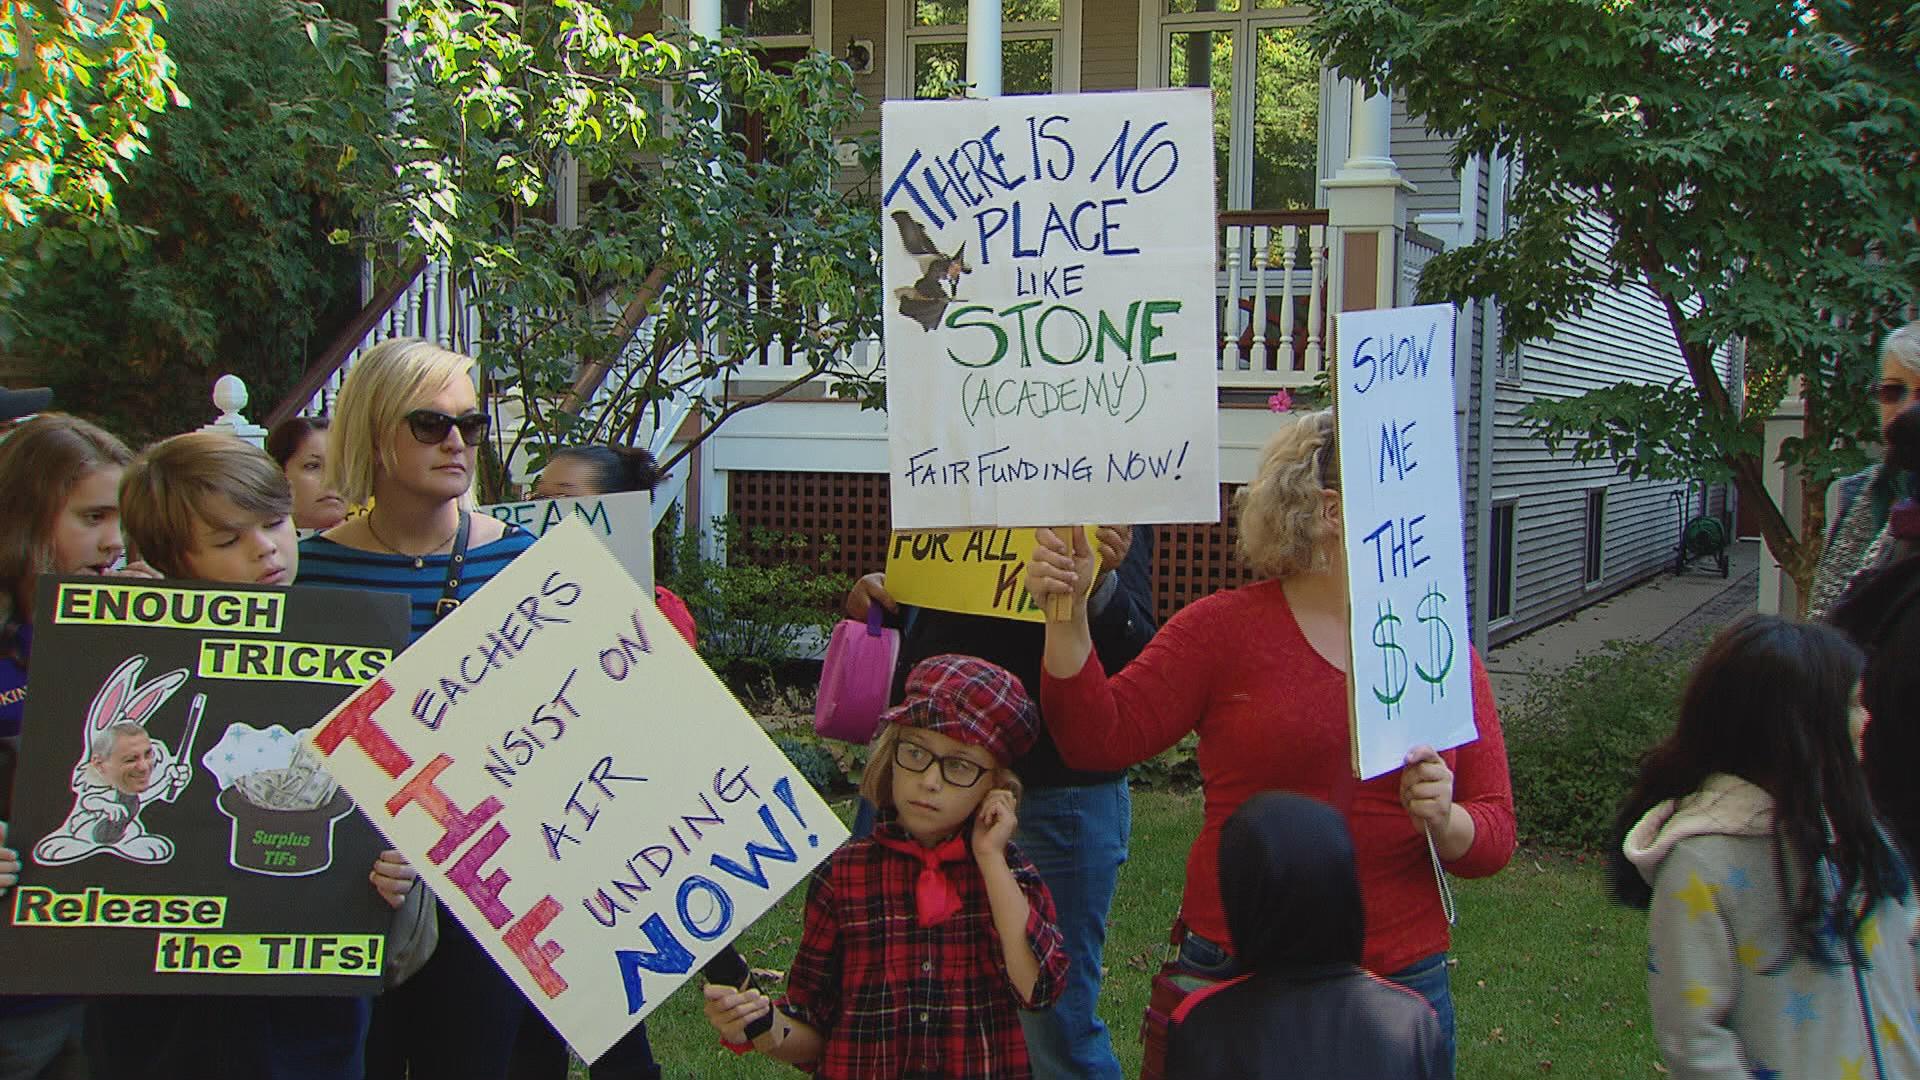 The group Parents 4 Teachers held a demonstration Monday morning in the Ravenswood neighborhood of Mayor Rahm Emanuel, calling on him to divert TIF funds to stabilize Chicago Public Schools funding.